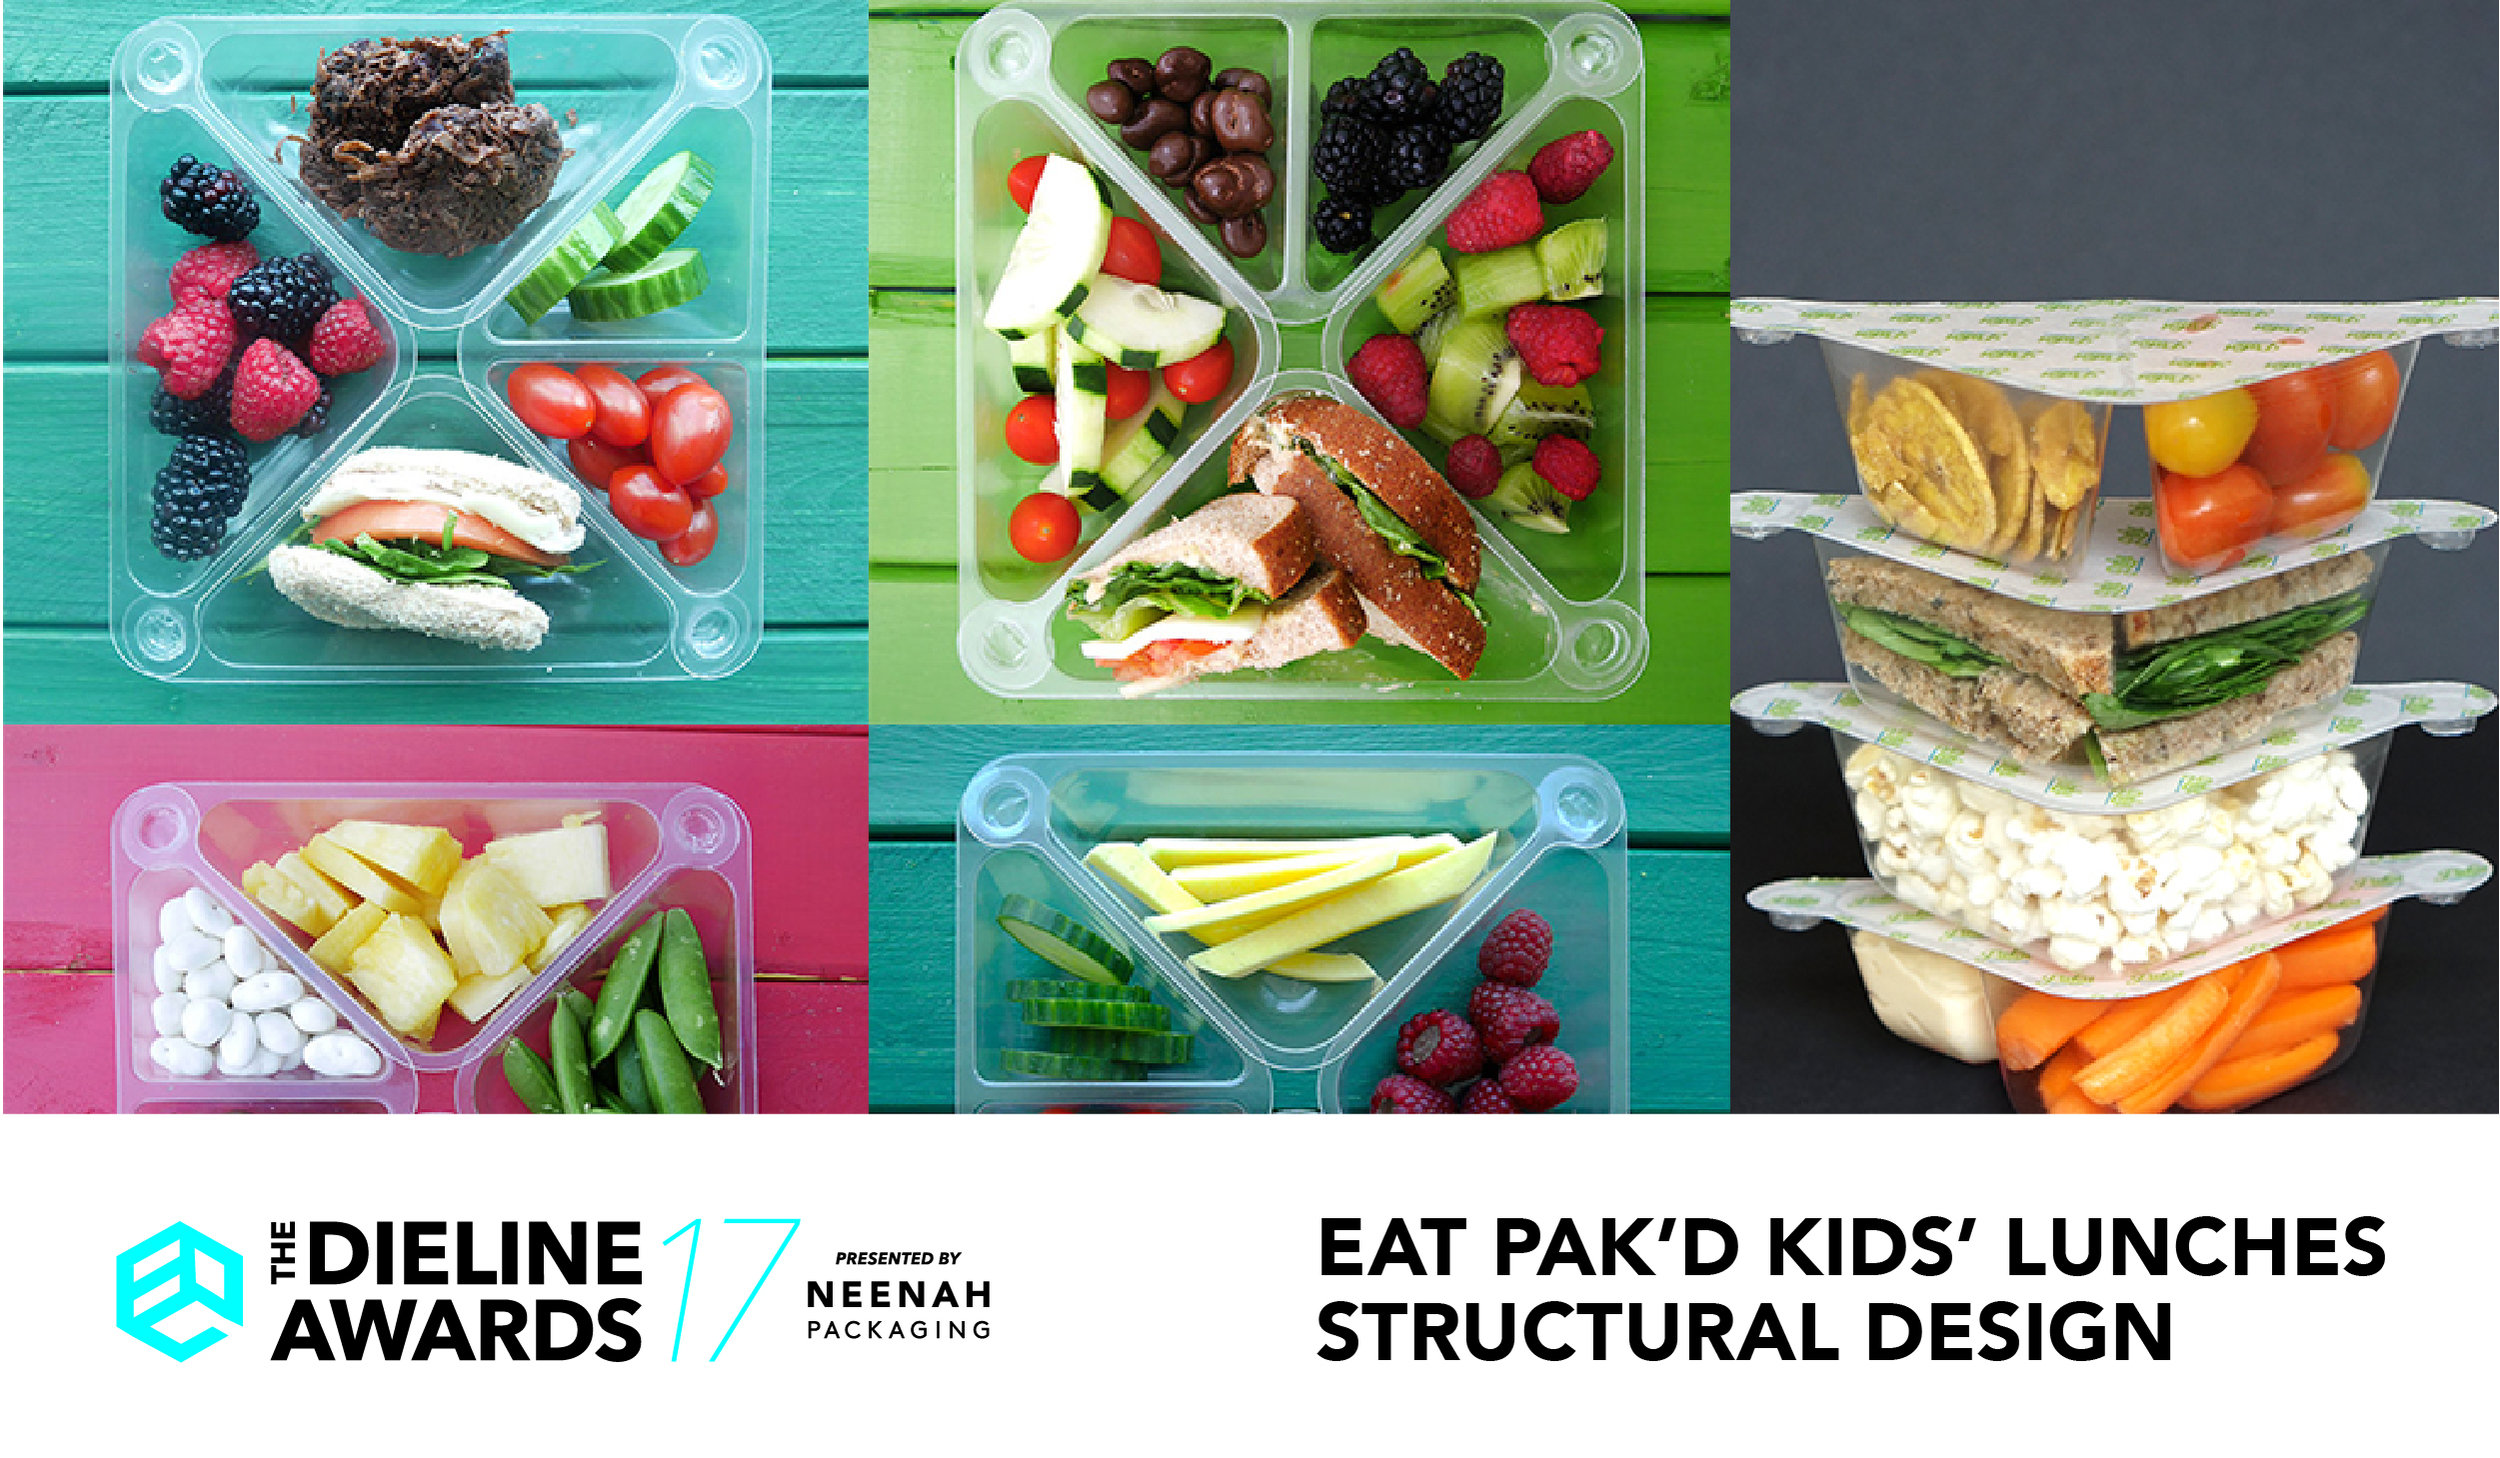 The Dieline Awards 2017 Outstanding Achievements: EAT PAK’D KIDS’ LUNCHES STRUCTURAL DESIGN